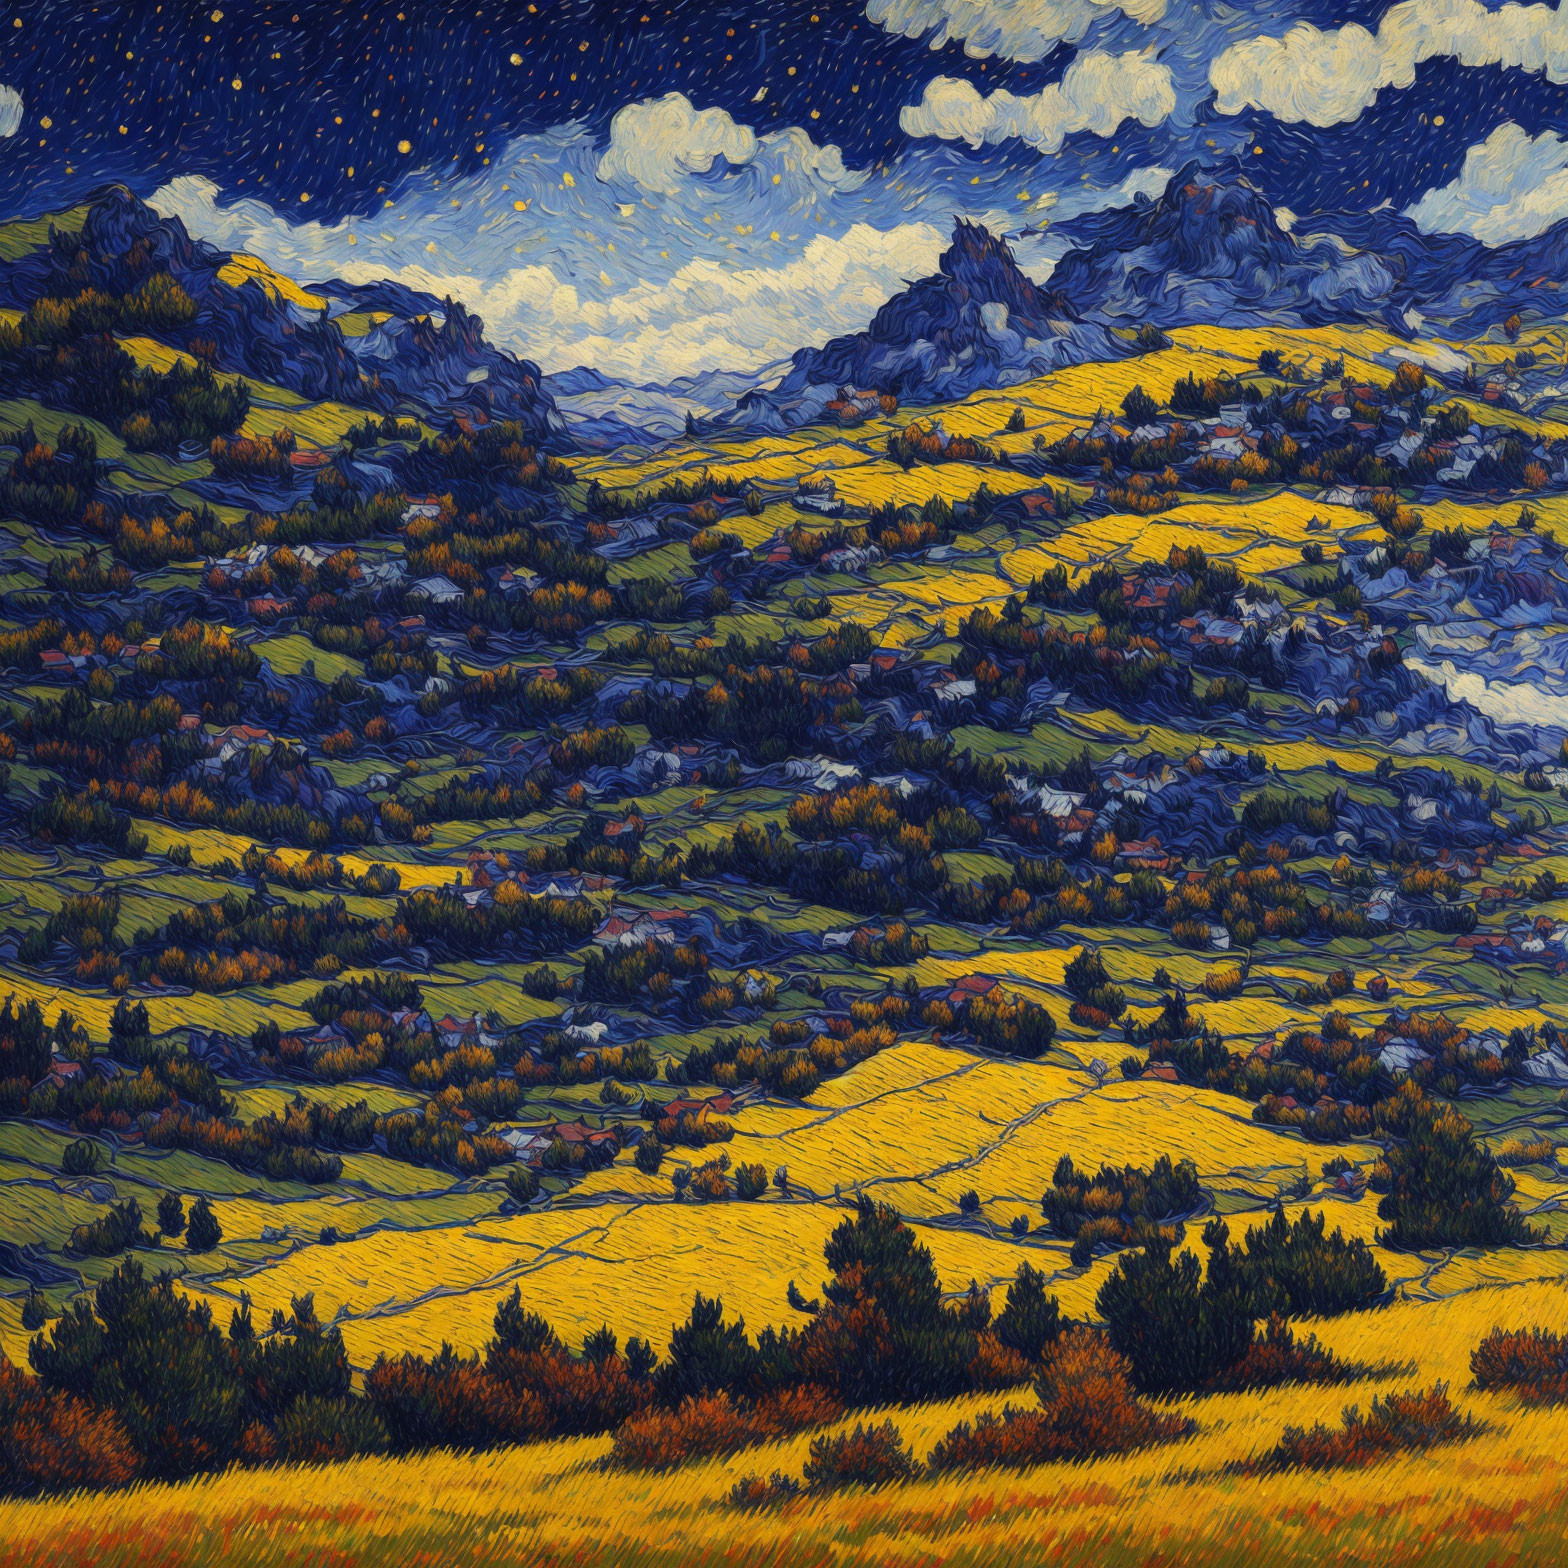 Colorful Van Gogh-style painting of rolling hills under a starry night